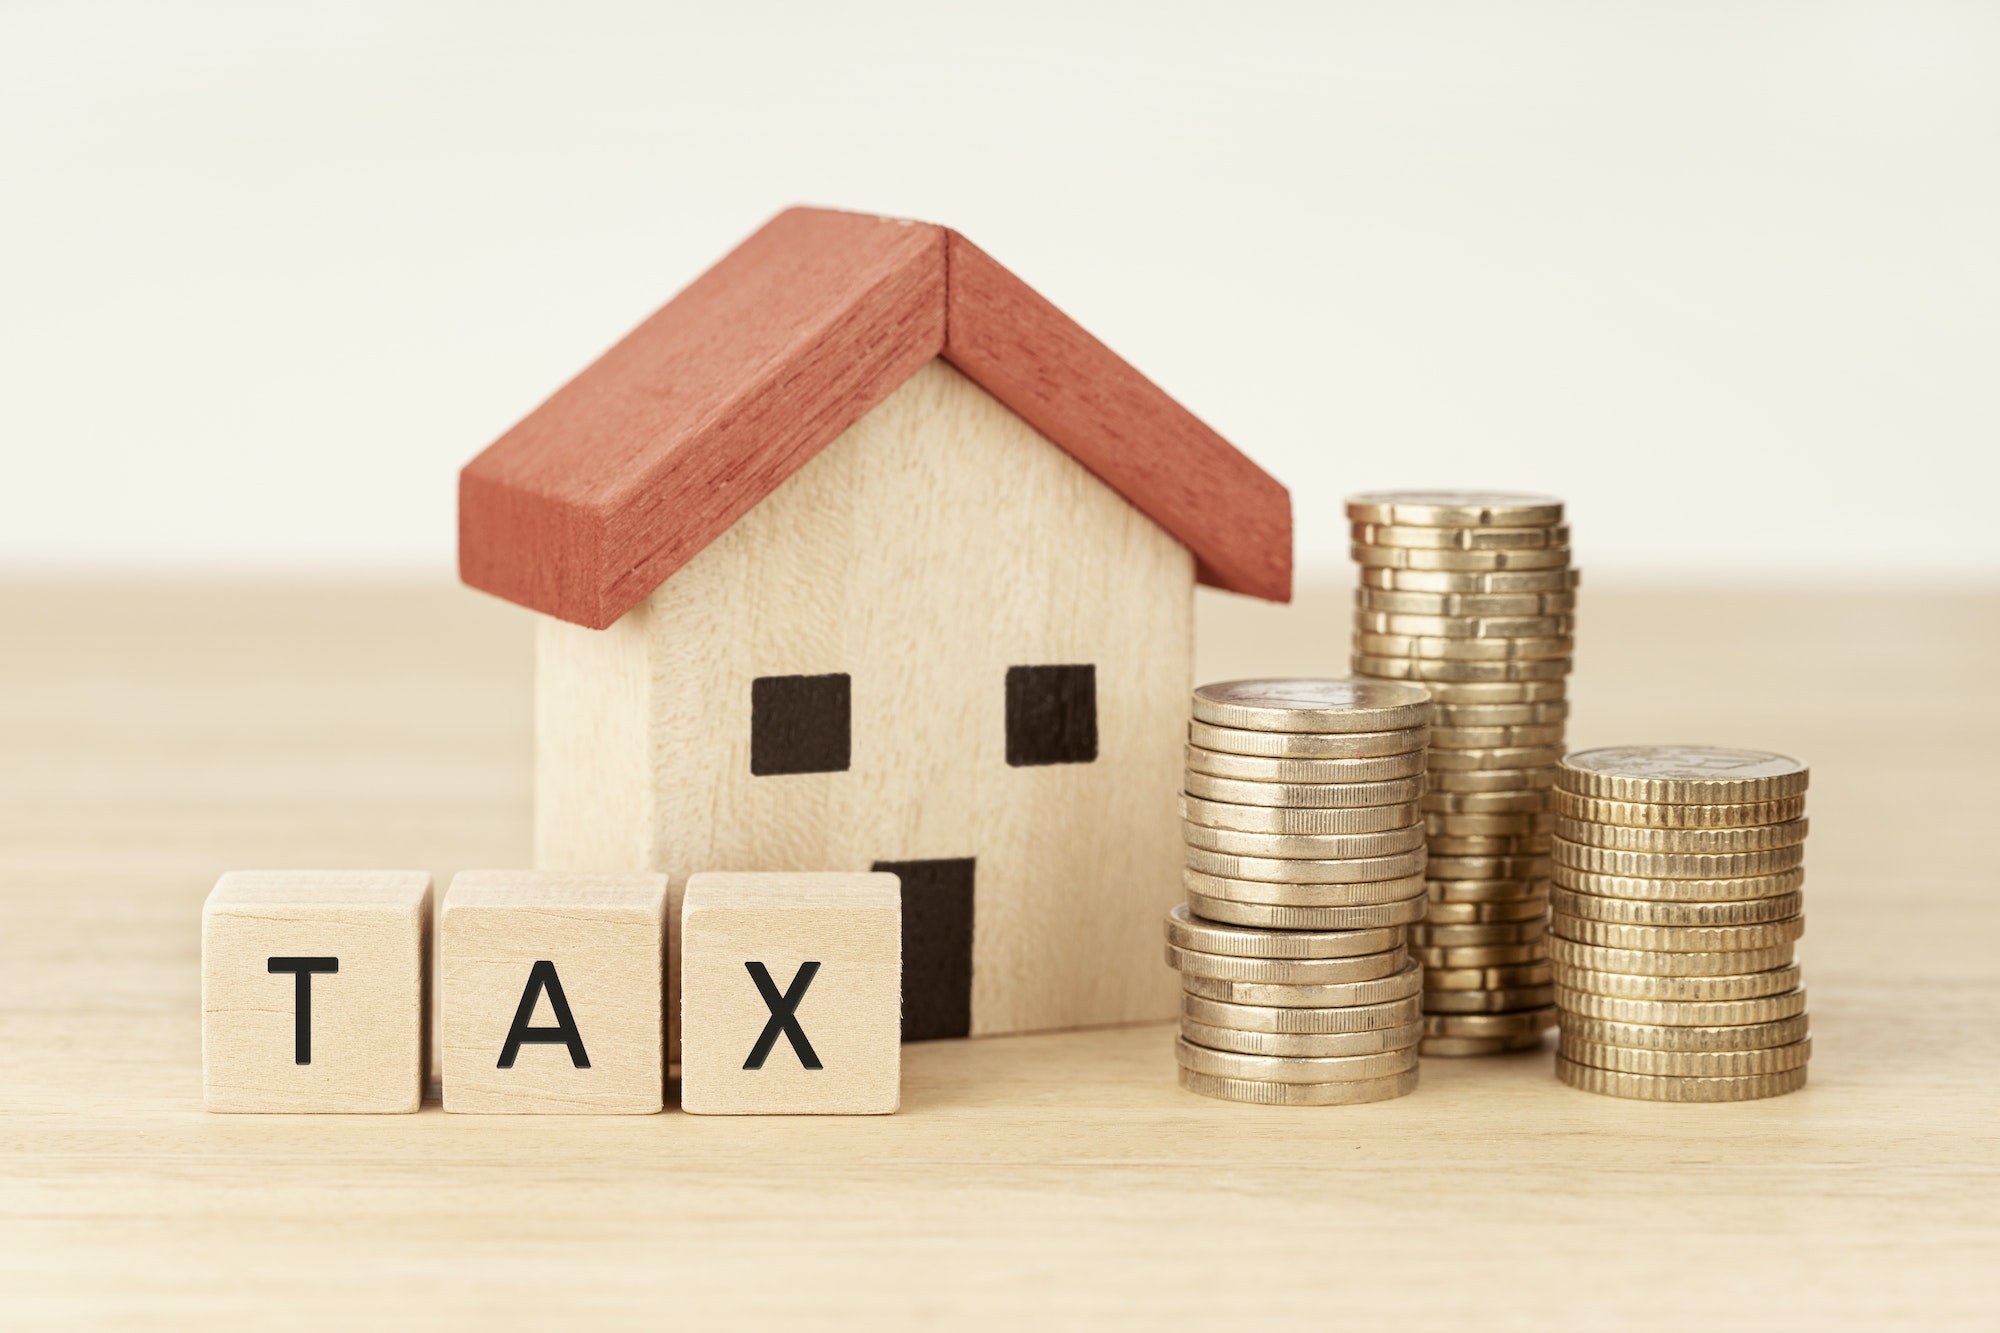 Concept of paying tax for housing and property